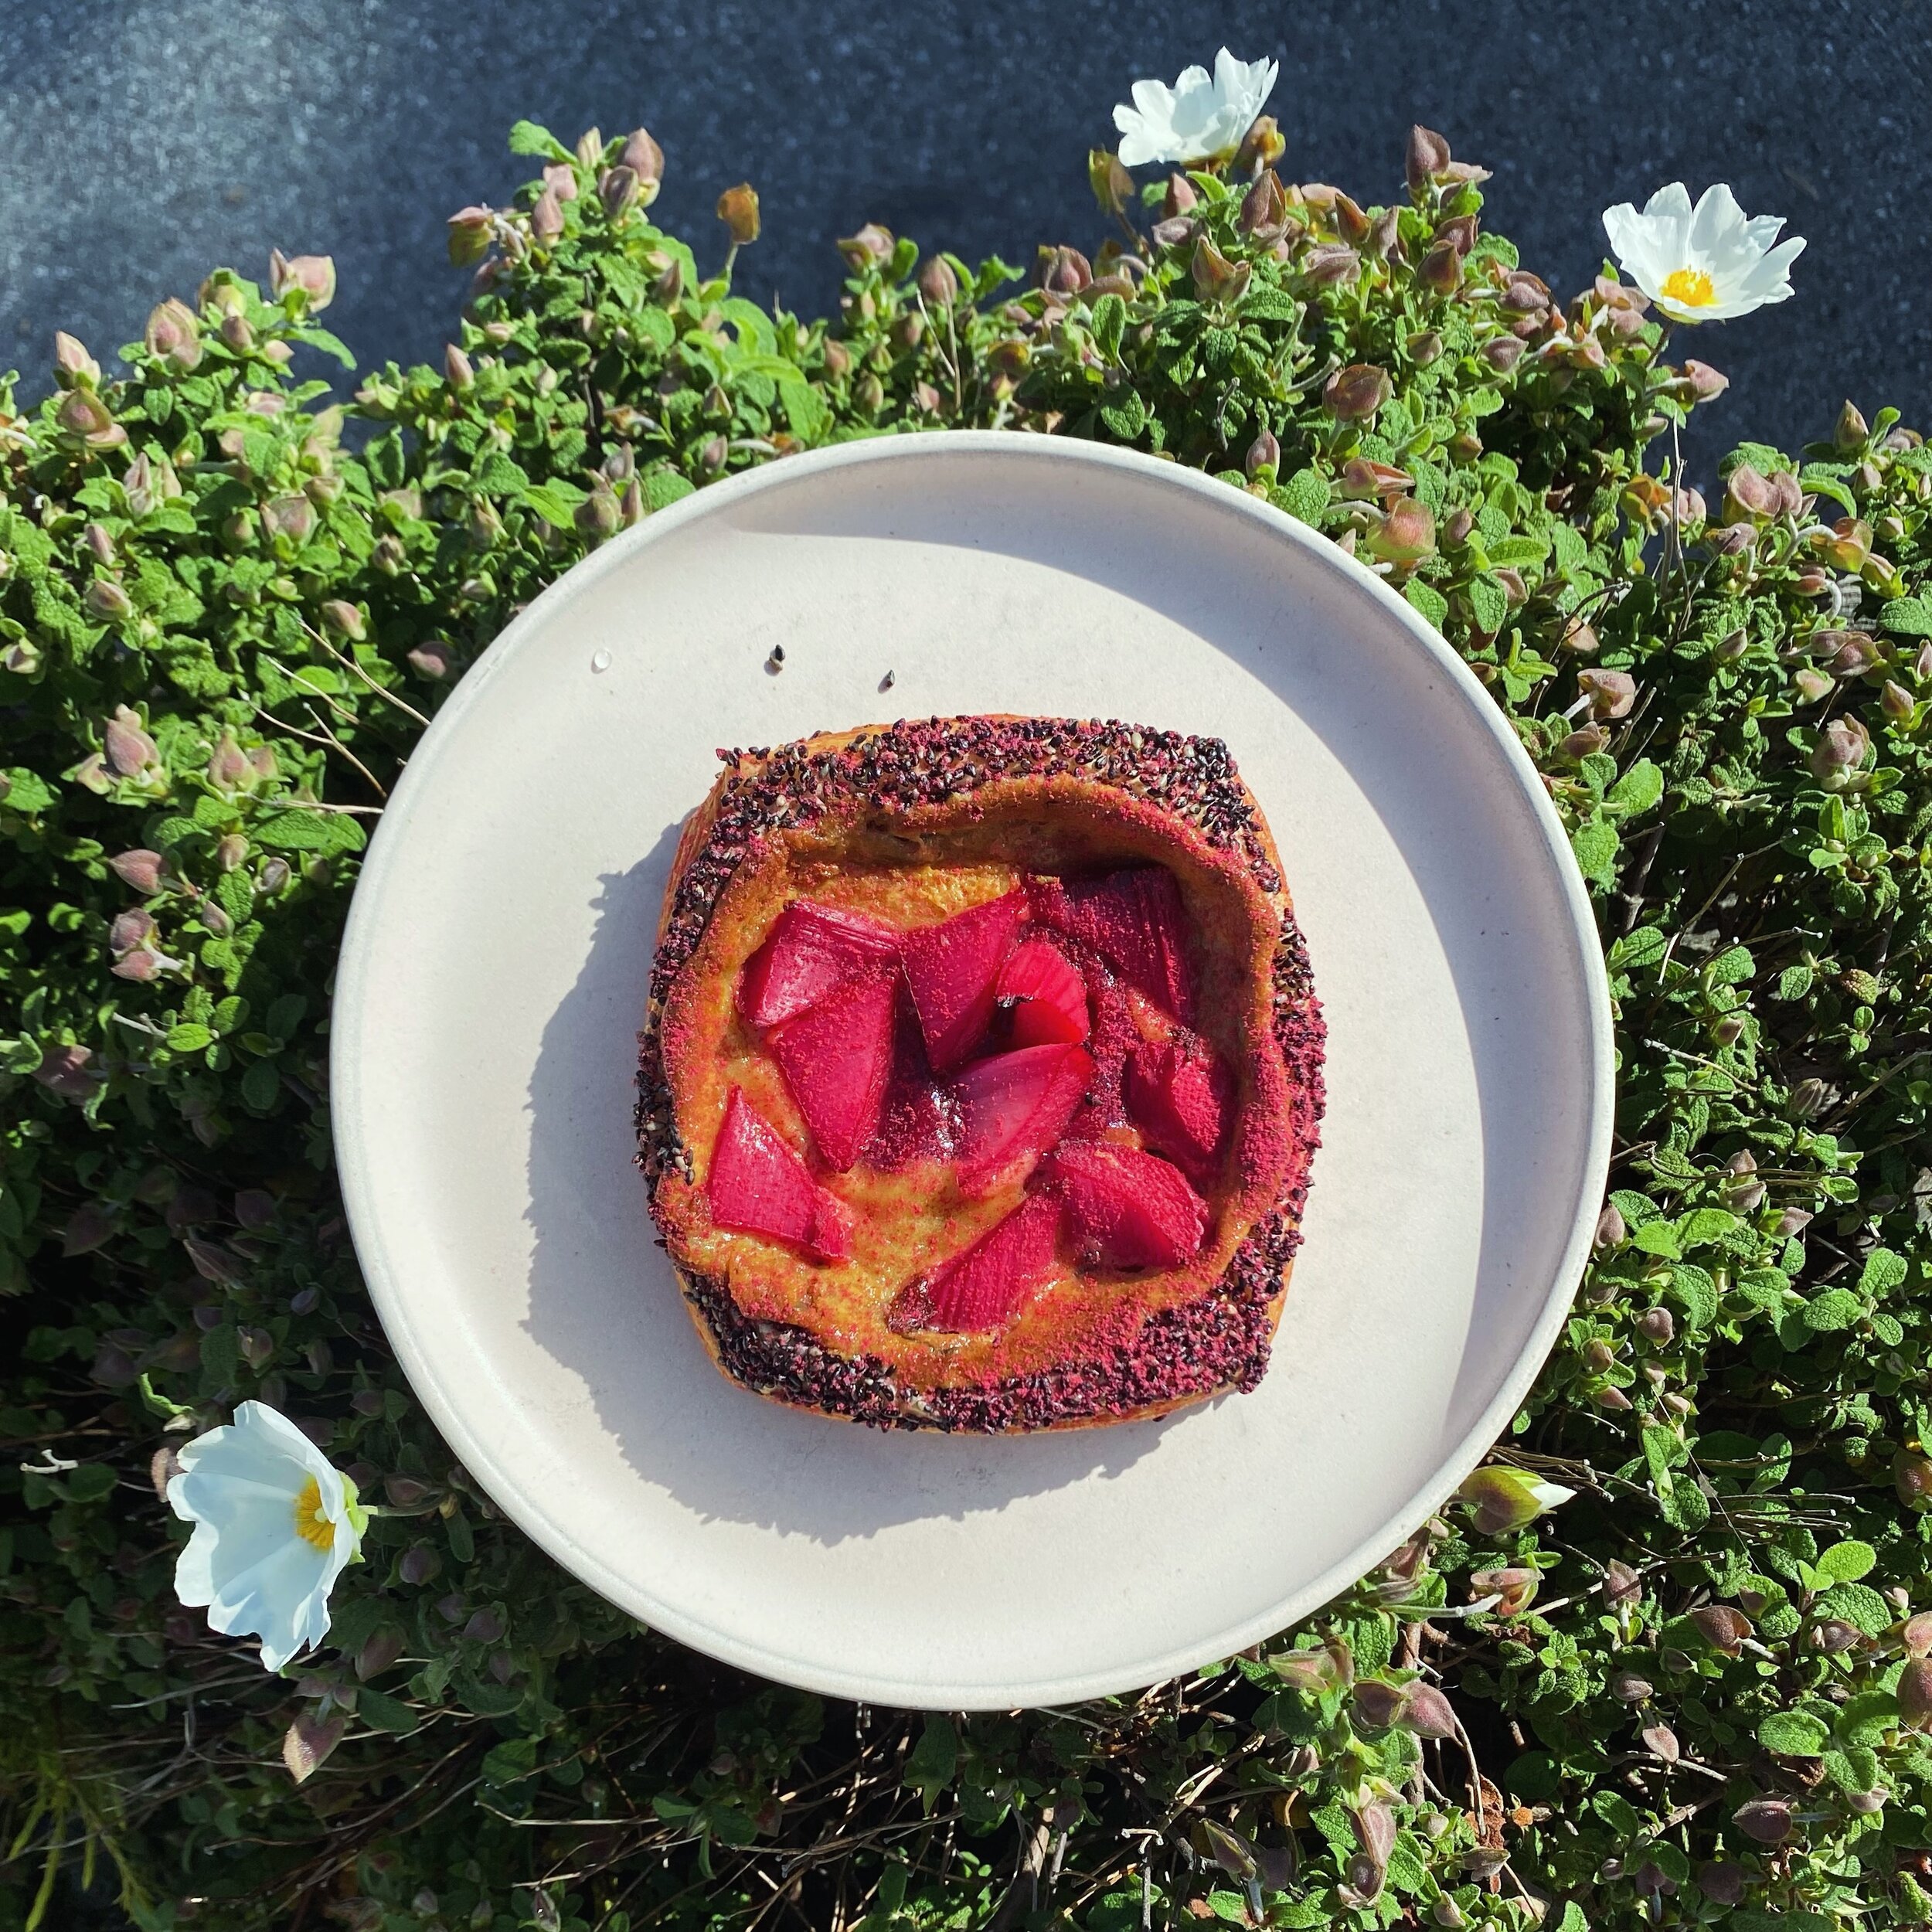 Spring vibes brought to us by lipstick red rhubarb sprinkled on lychee pastry cream, raspberry jam, and @wadaman_goma black sesame crusted danish. 

Did anyone notice it today? Weekend special until the season has nothing left to give. 💋